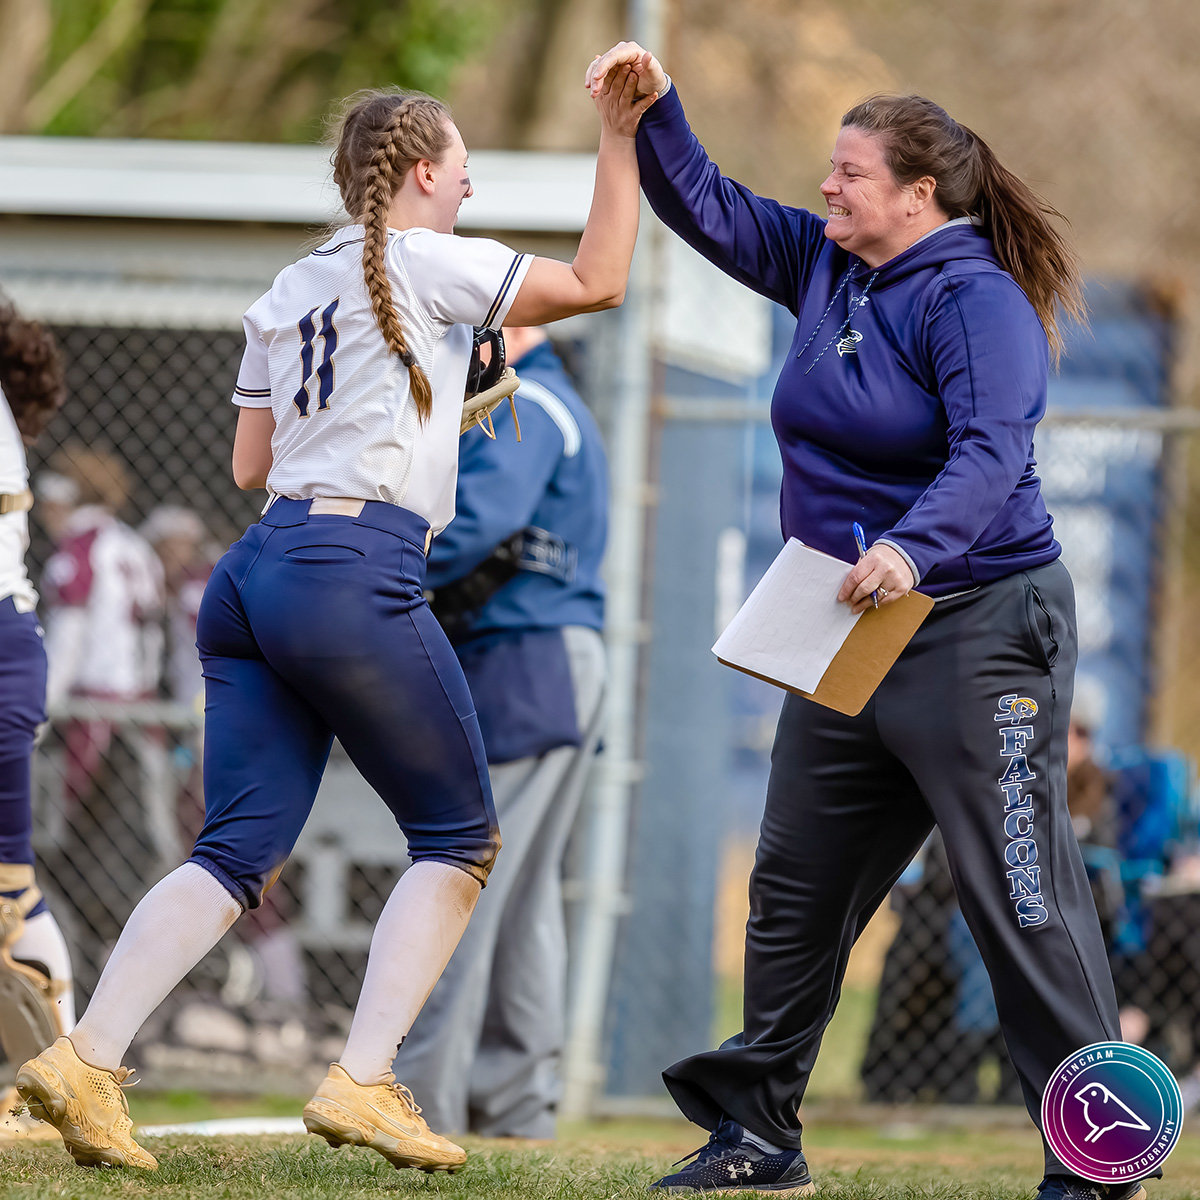 Severna Park head coach Meredith McAlister congratulated third baseman Livi Driver during the team’s 9-2 win over Broadneck.